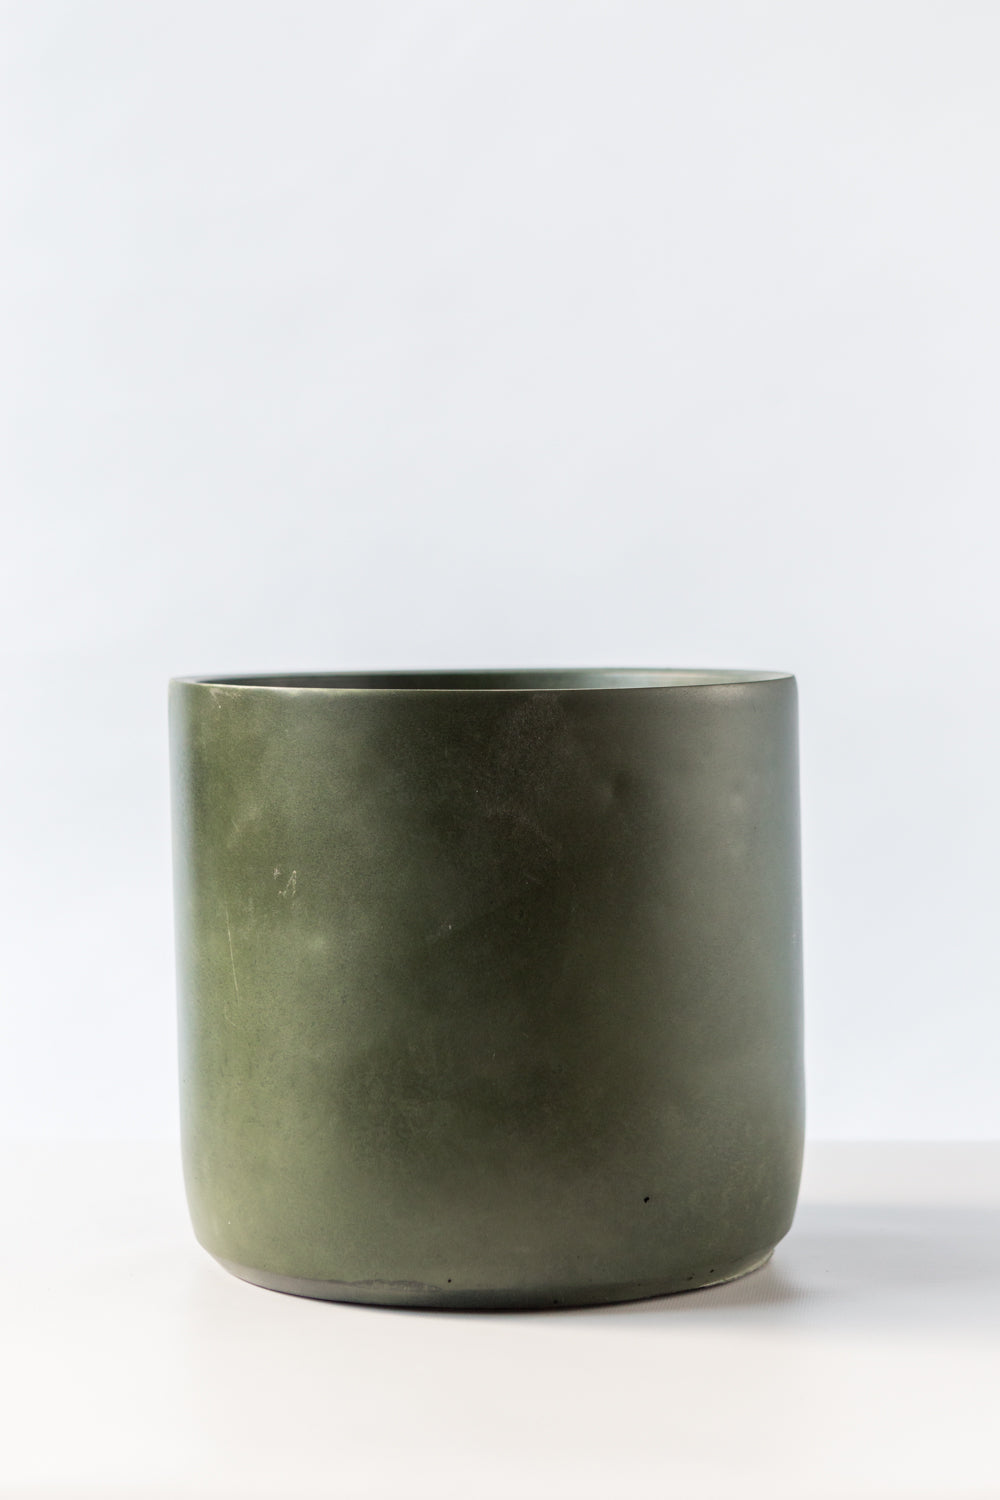 Extra Large Dark Olive Green Plant Pot handmade by Concrete Jungle